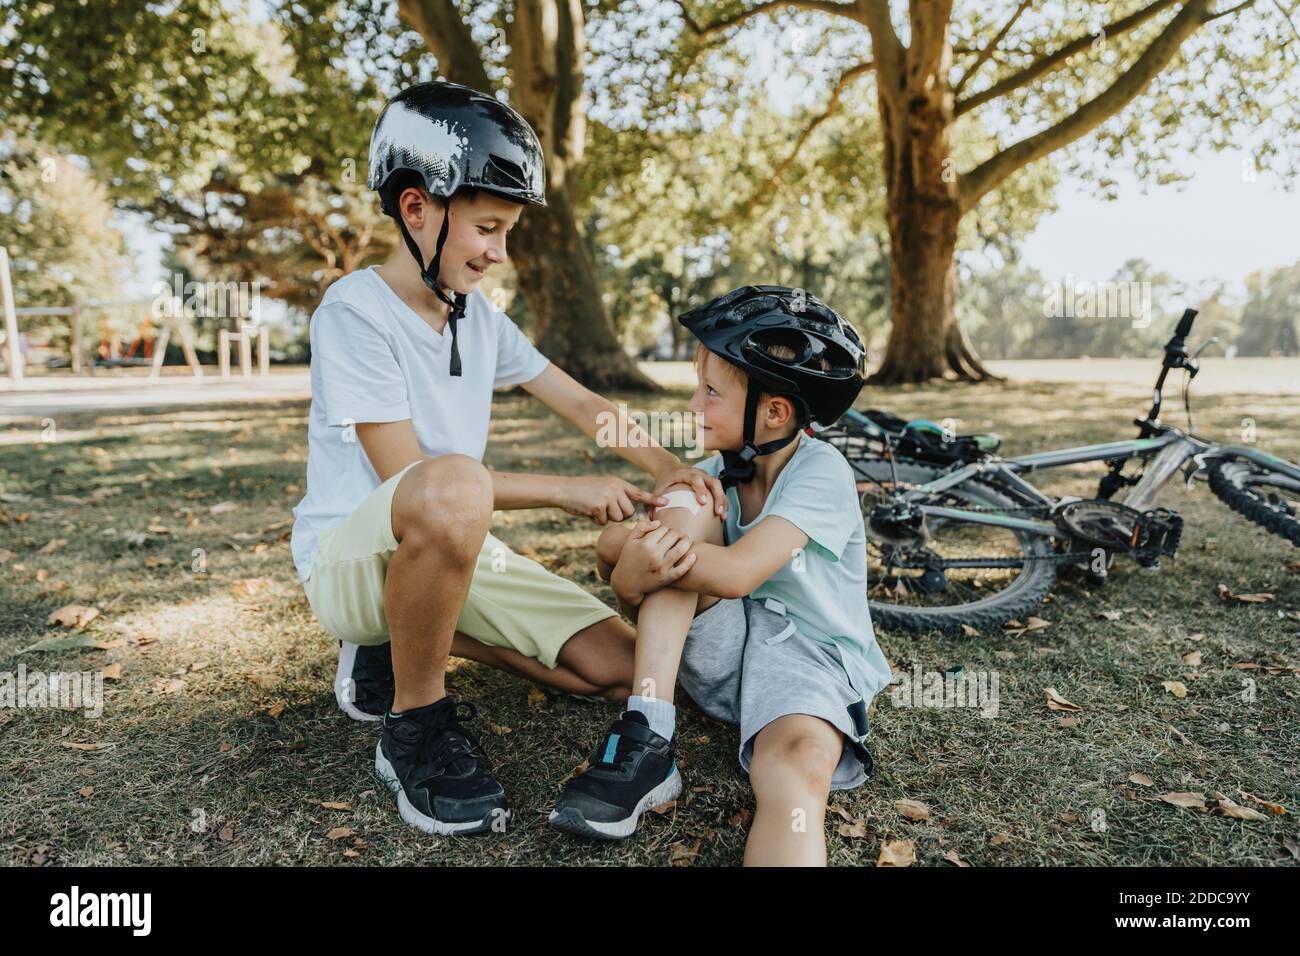 Boy smiling after putting bandage on younger brother knee sitting in public park Stock Photo